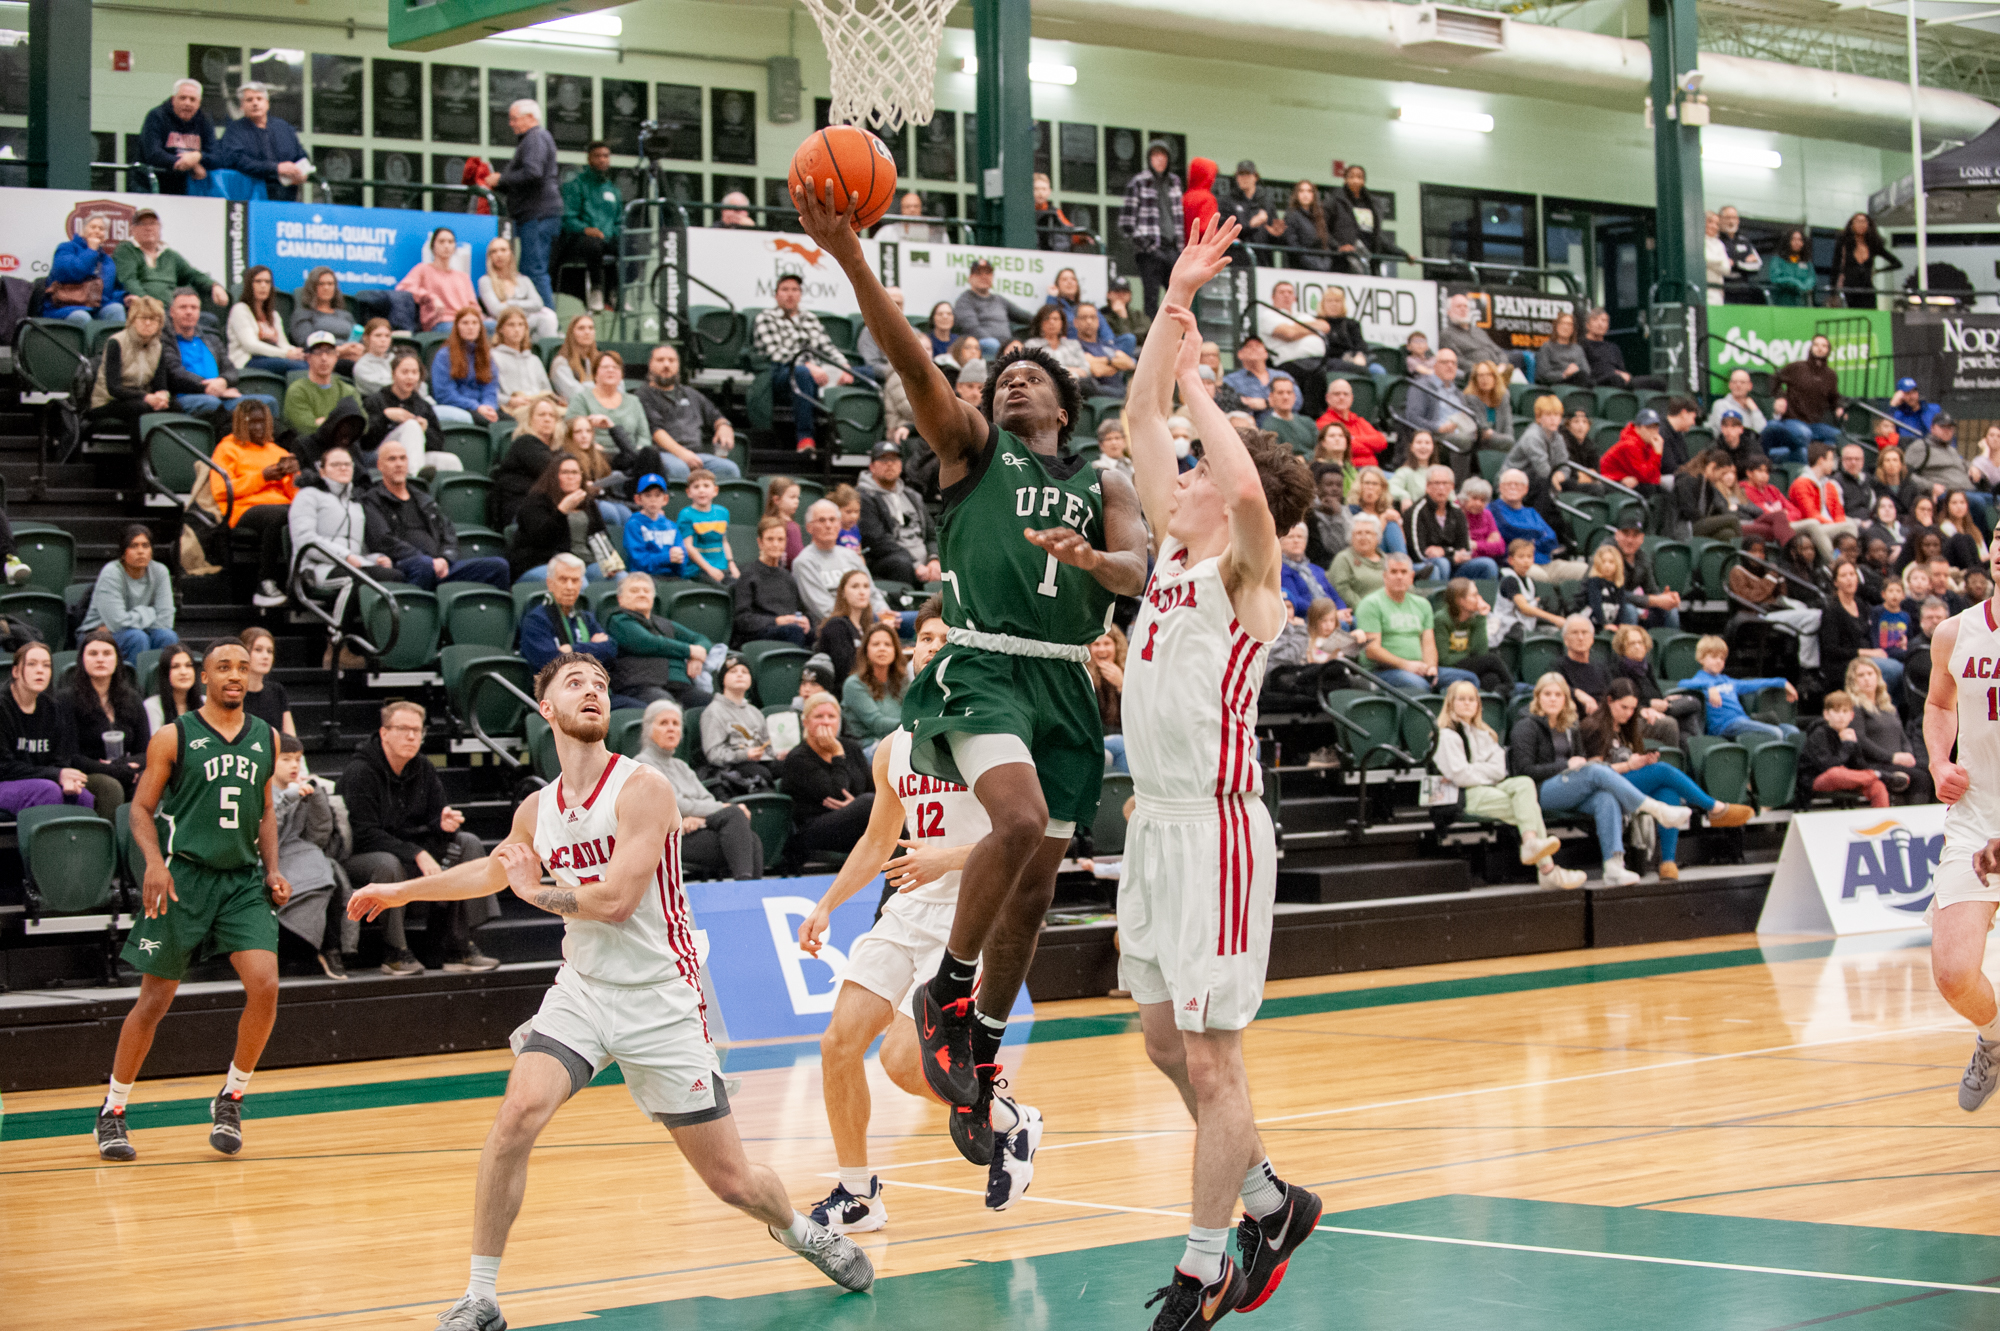 Panthers defeat Acadia 89-56, complete season sweep